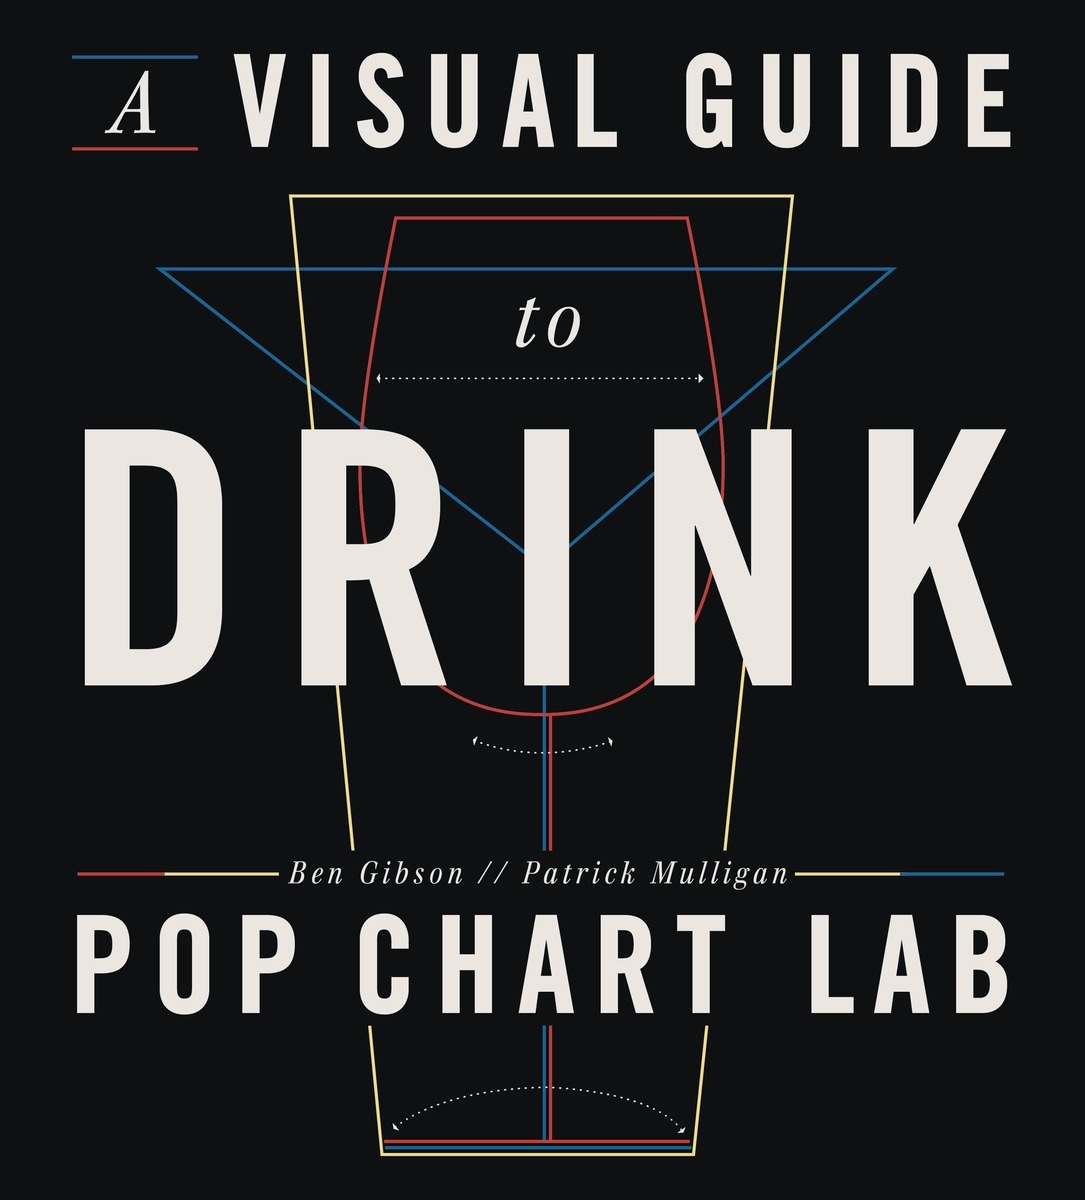 “A visual guide to drink”, di Pop Chart Lab, Penguin Random House 2015